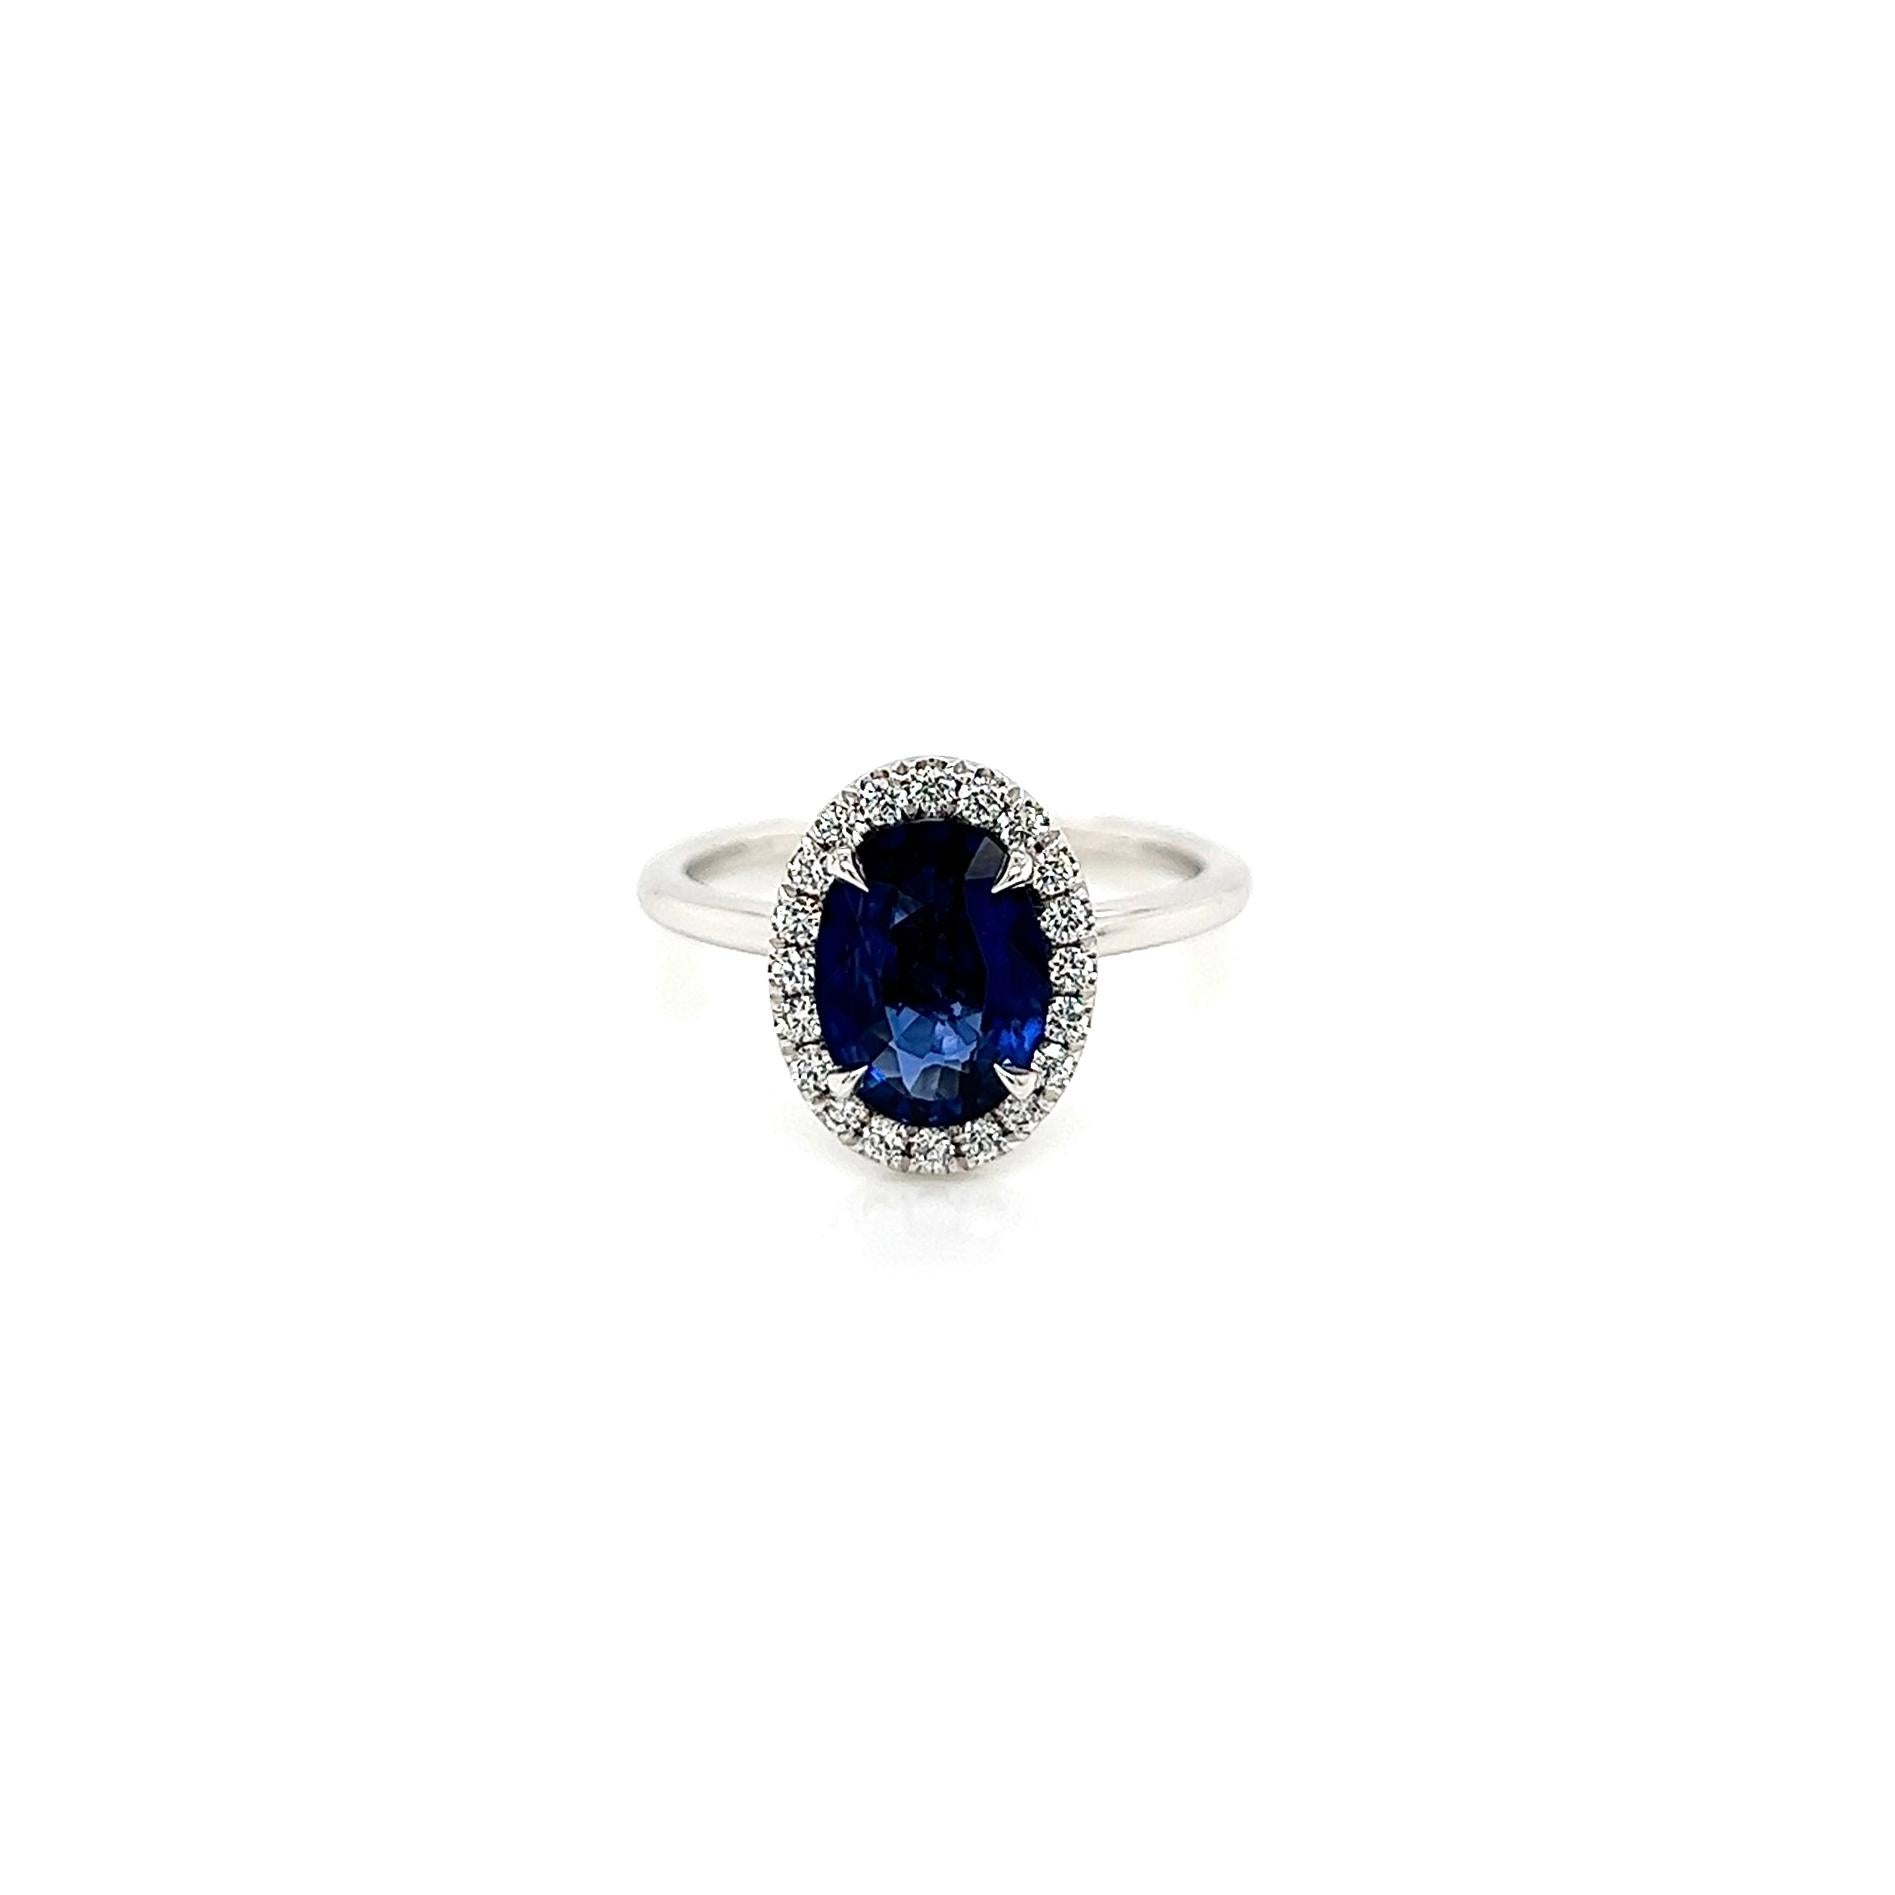 1.88 Total Carat Sapphire Diamond Halo Ladies Ring

-Metal Type: 18K White Gold
-1.58 Carat Oval Shaped Blue Sapphire
-0.30 Carat Round Side Diamonds 
-Size 5.75

Resize is available. Just contact us before ordering, the price may vary from size to